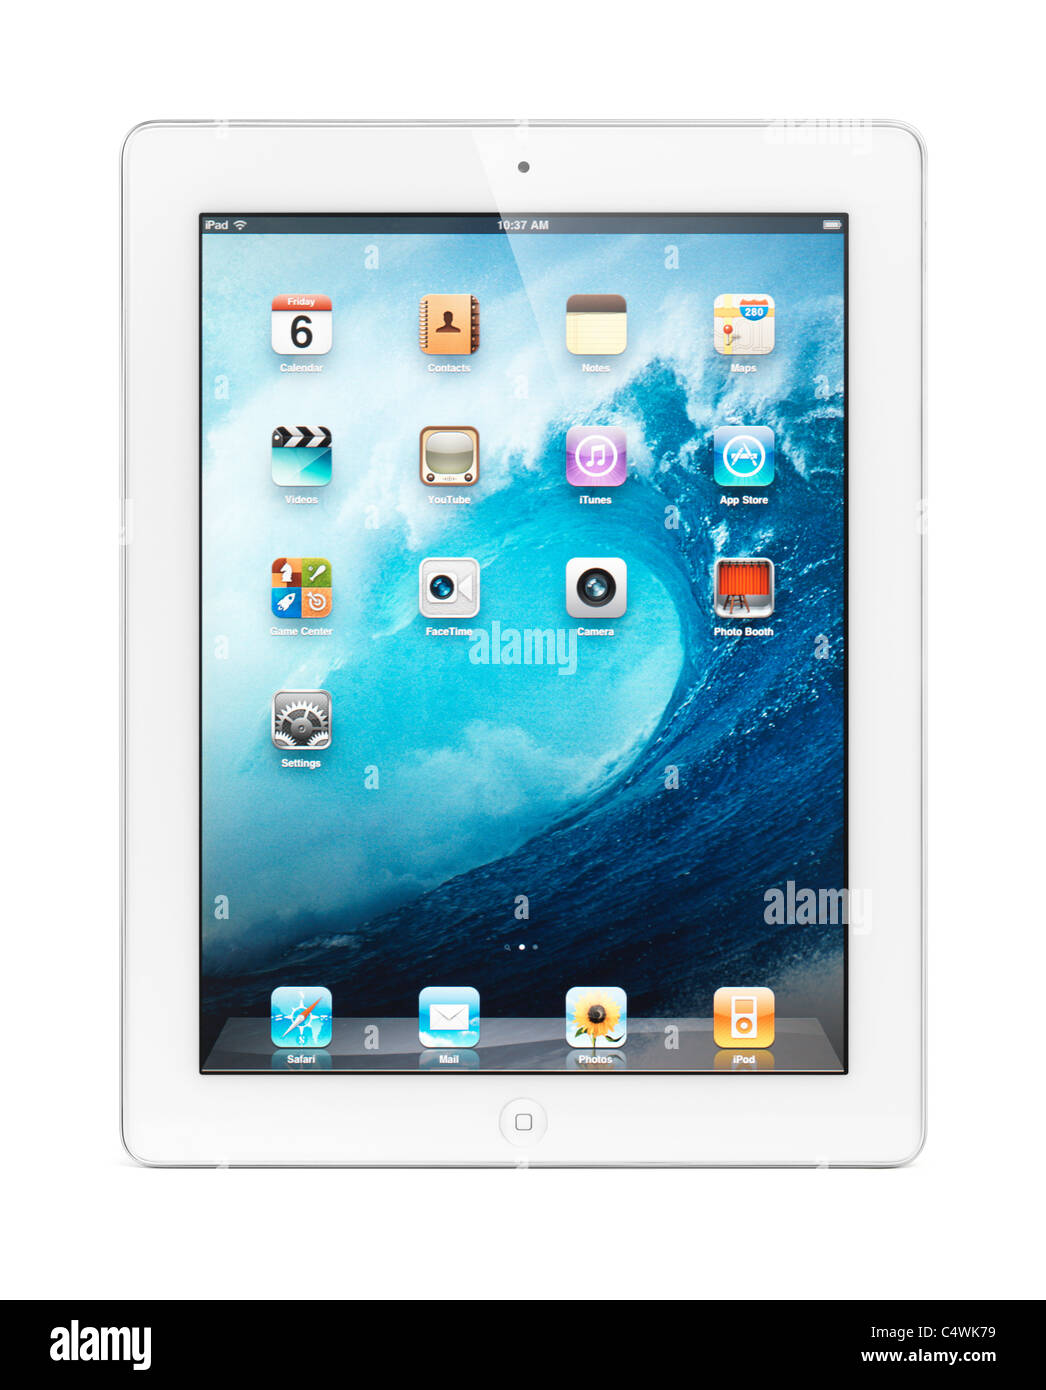 White Apple iPad 2 tablet computer with blue ocean desktop theme on its display. Isolated on white background. Stock Photo